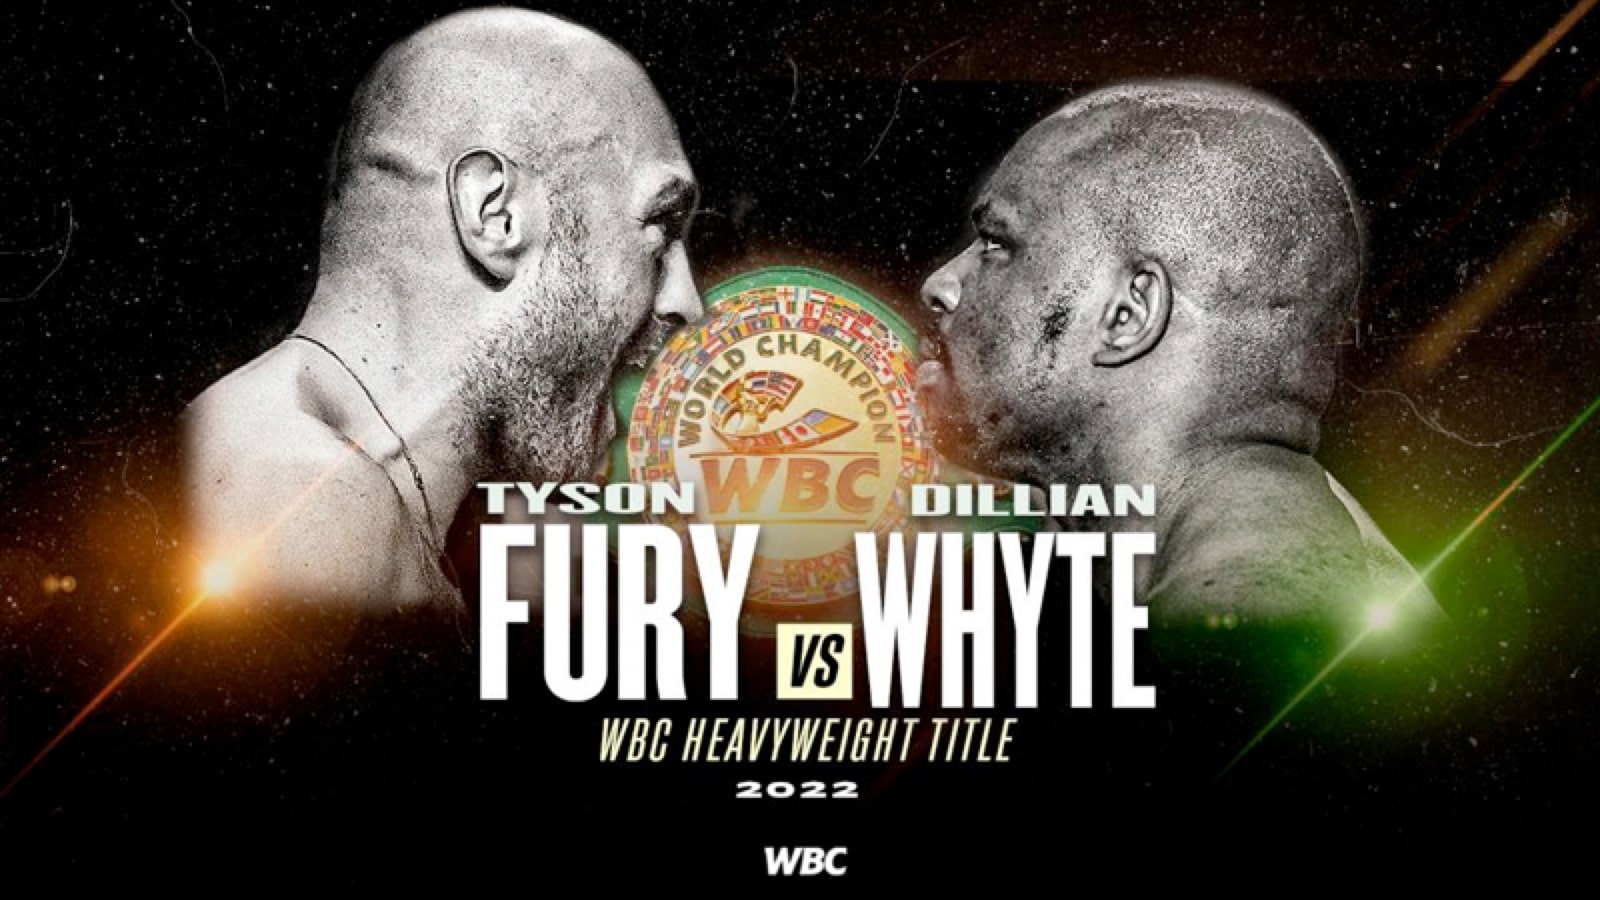 Image: Tyson Fury says Dillian Whyte has 3 days left to sign contract for fight